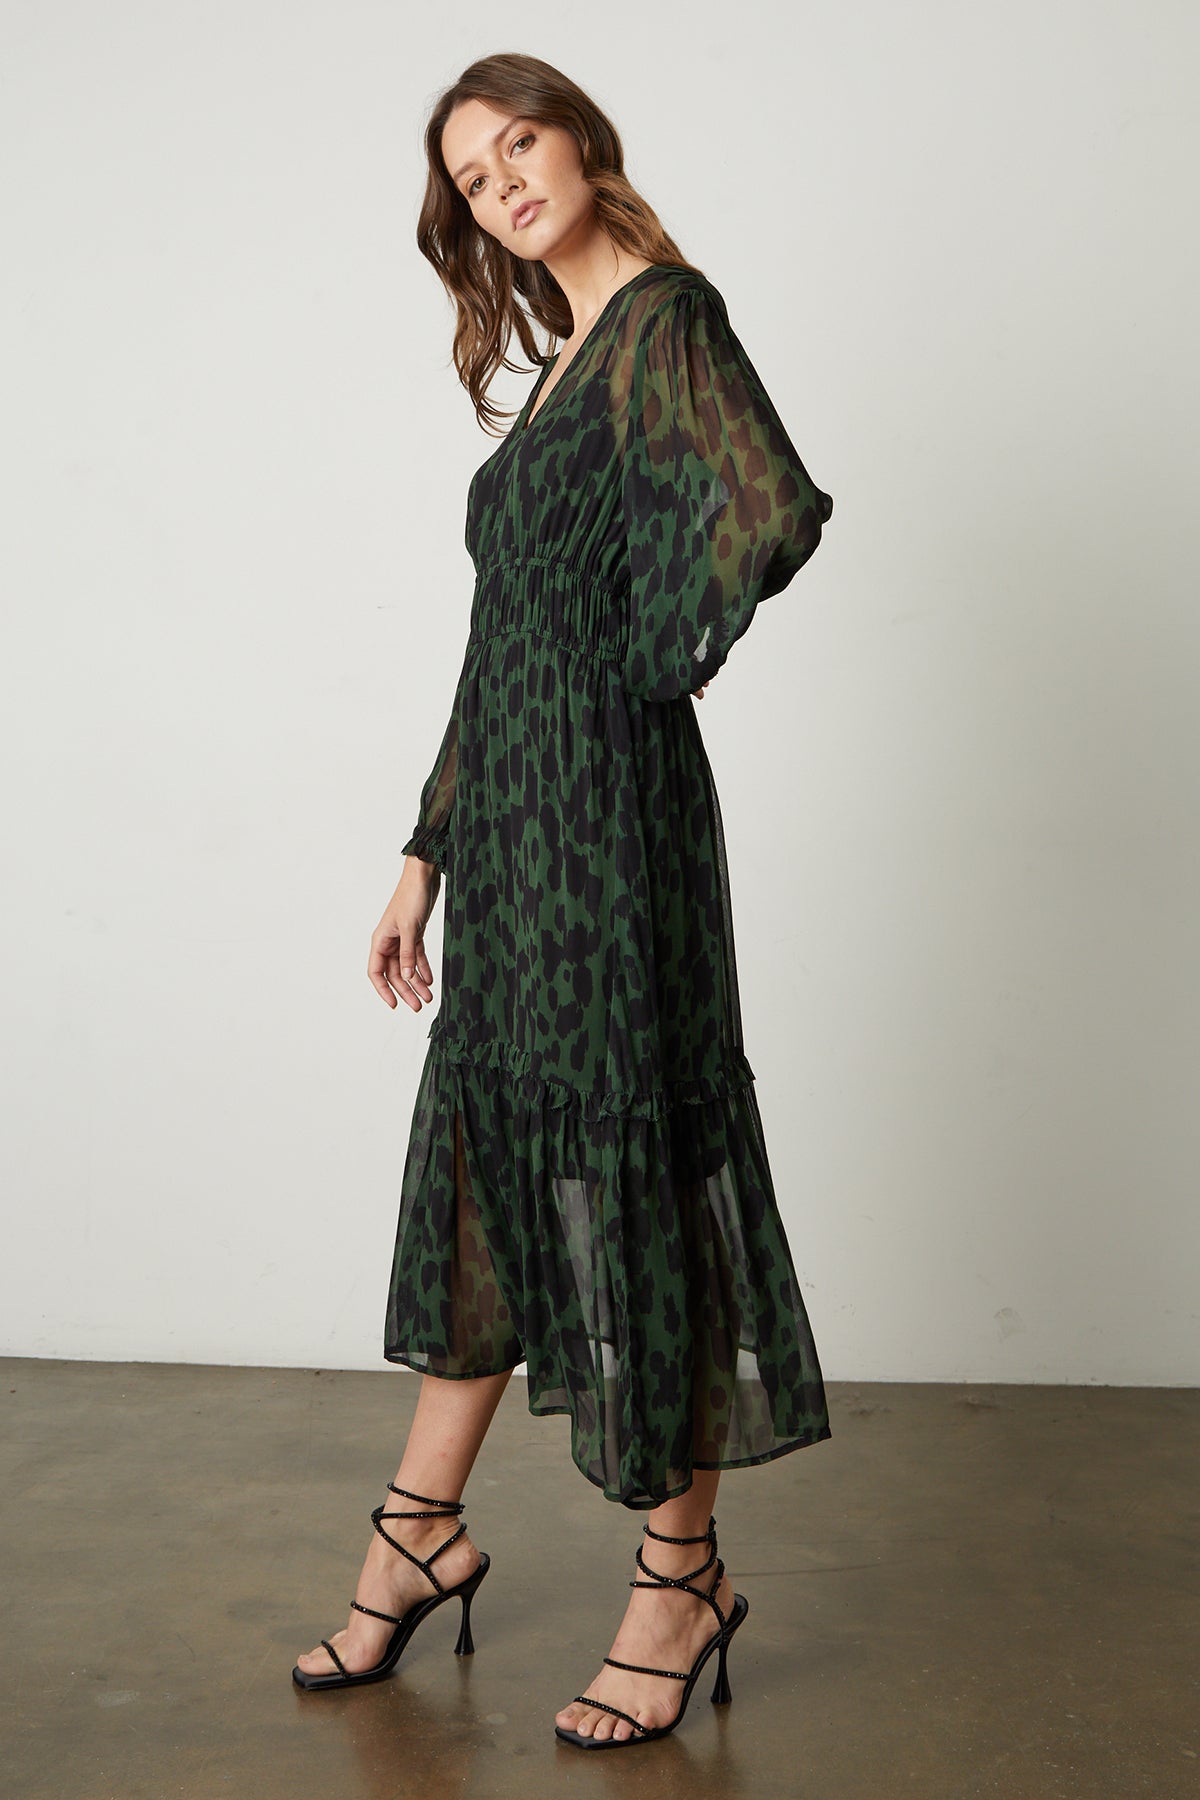   Kendra Printed Maxi Dress in green and black airbrush print with black sandals full length side & front 